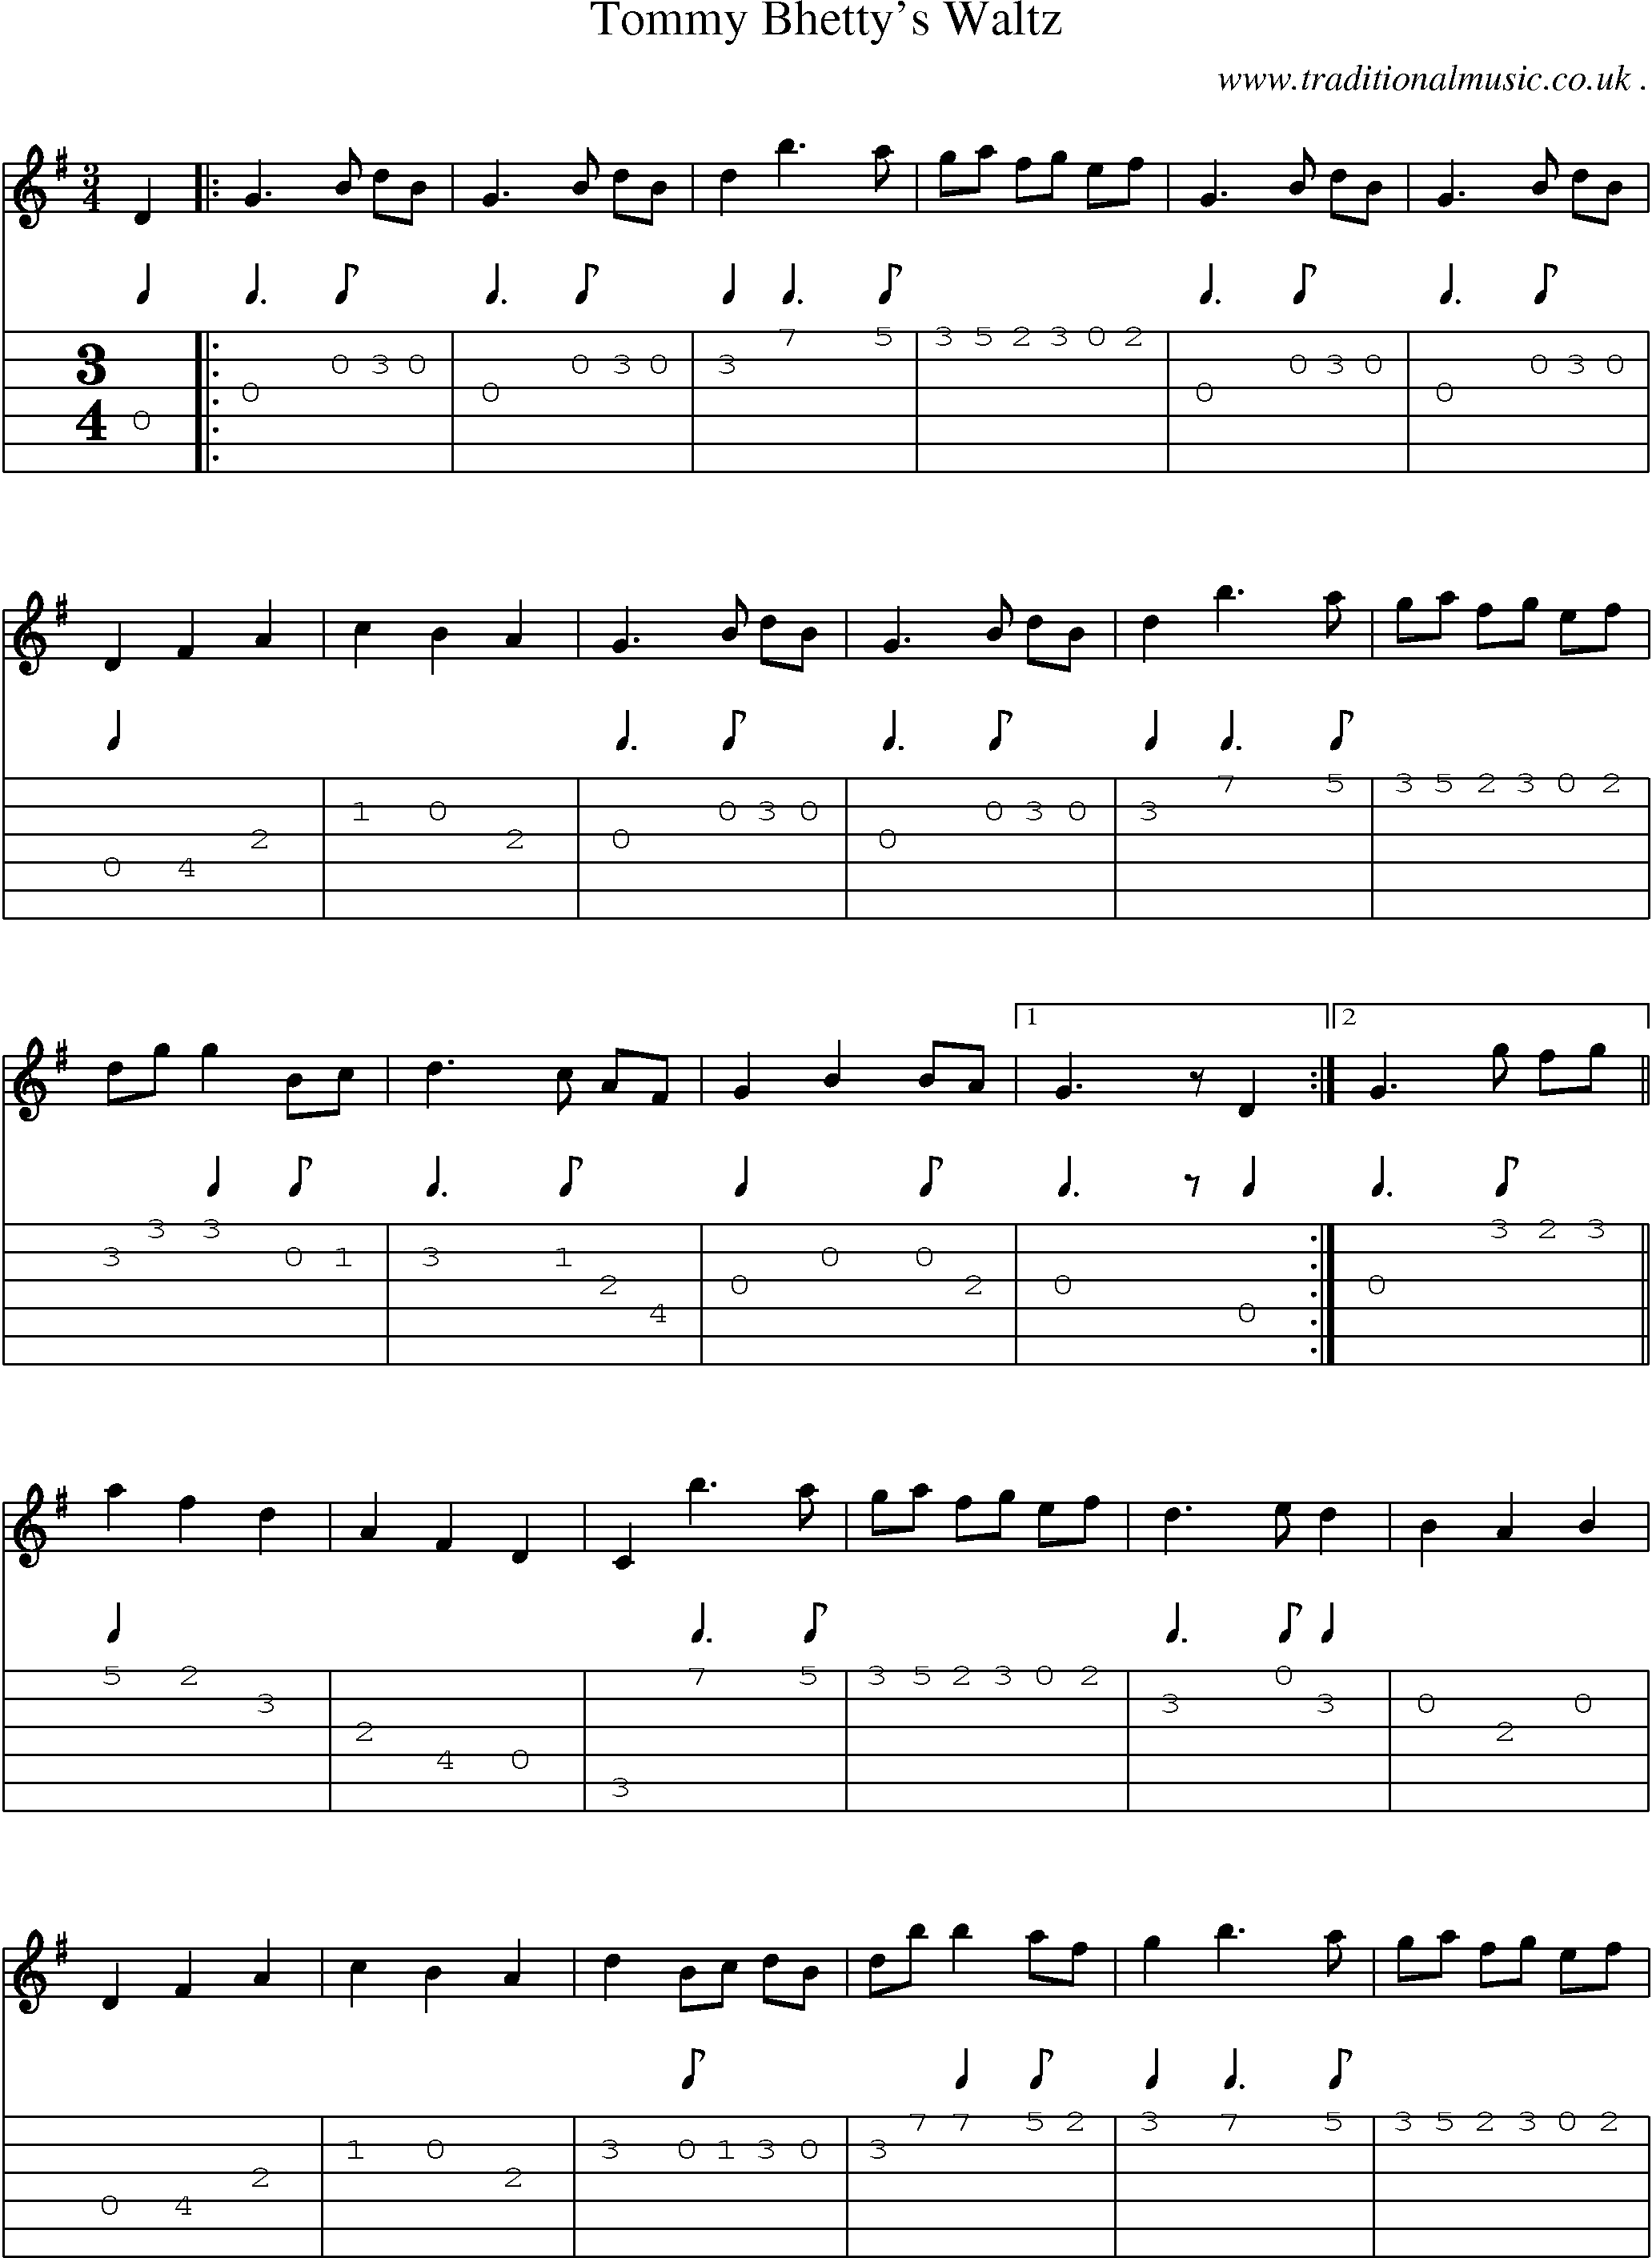 Sheet-Music and Guitar Tabs for Tommy Bhettys Waltz